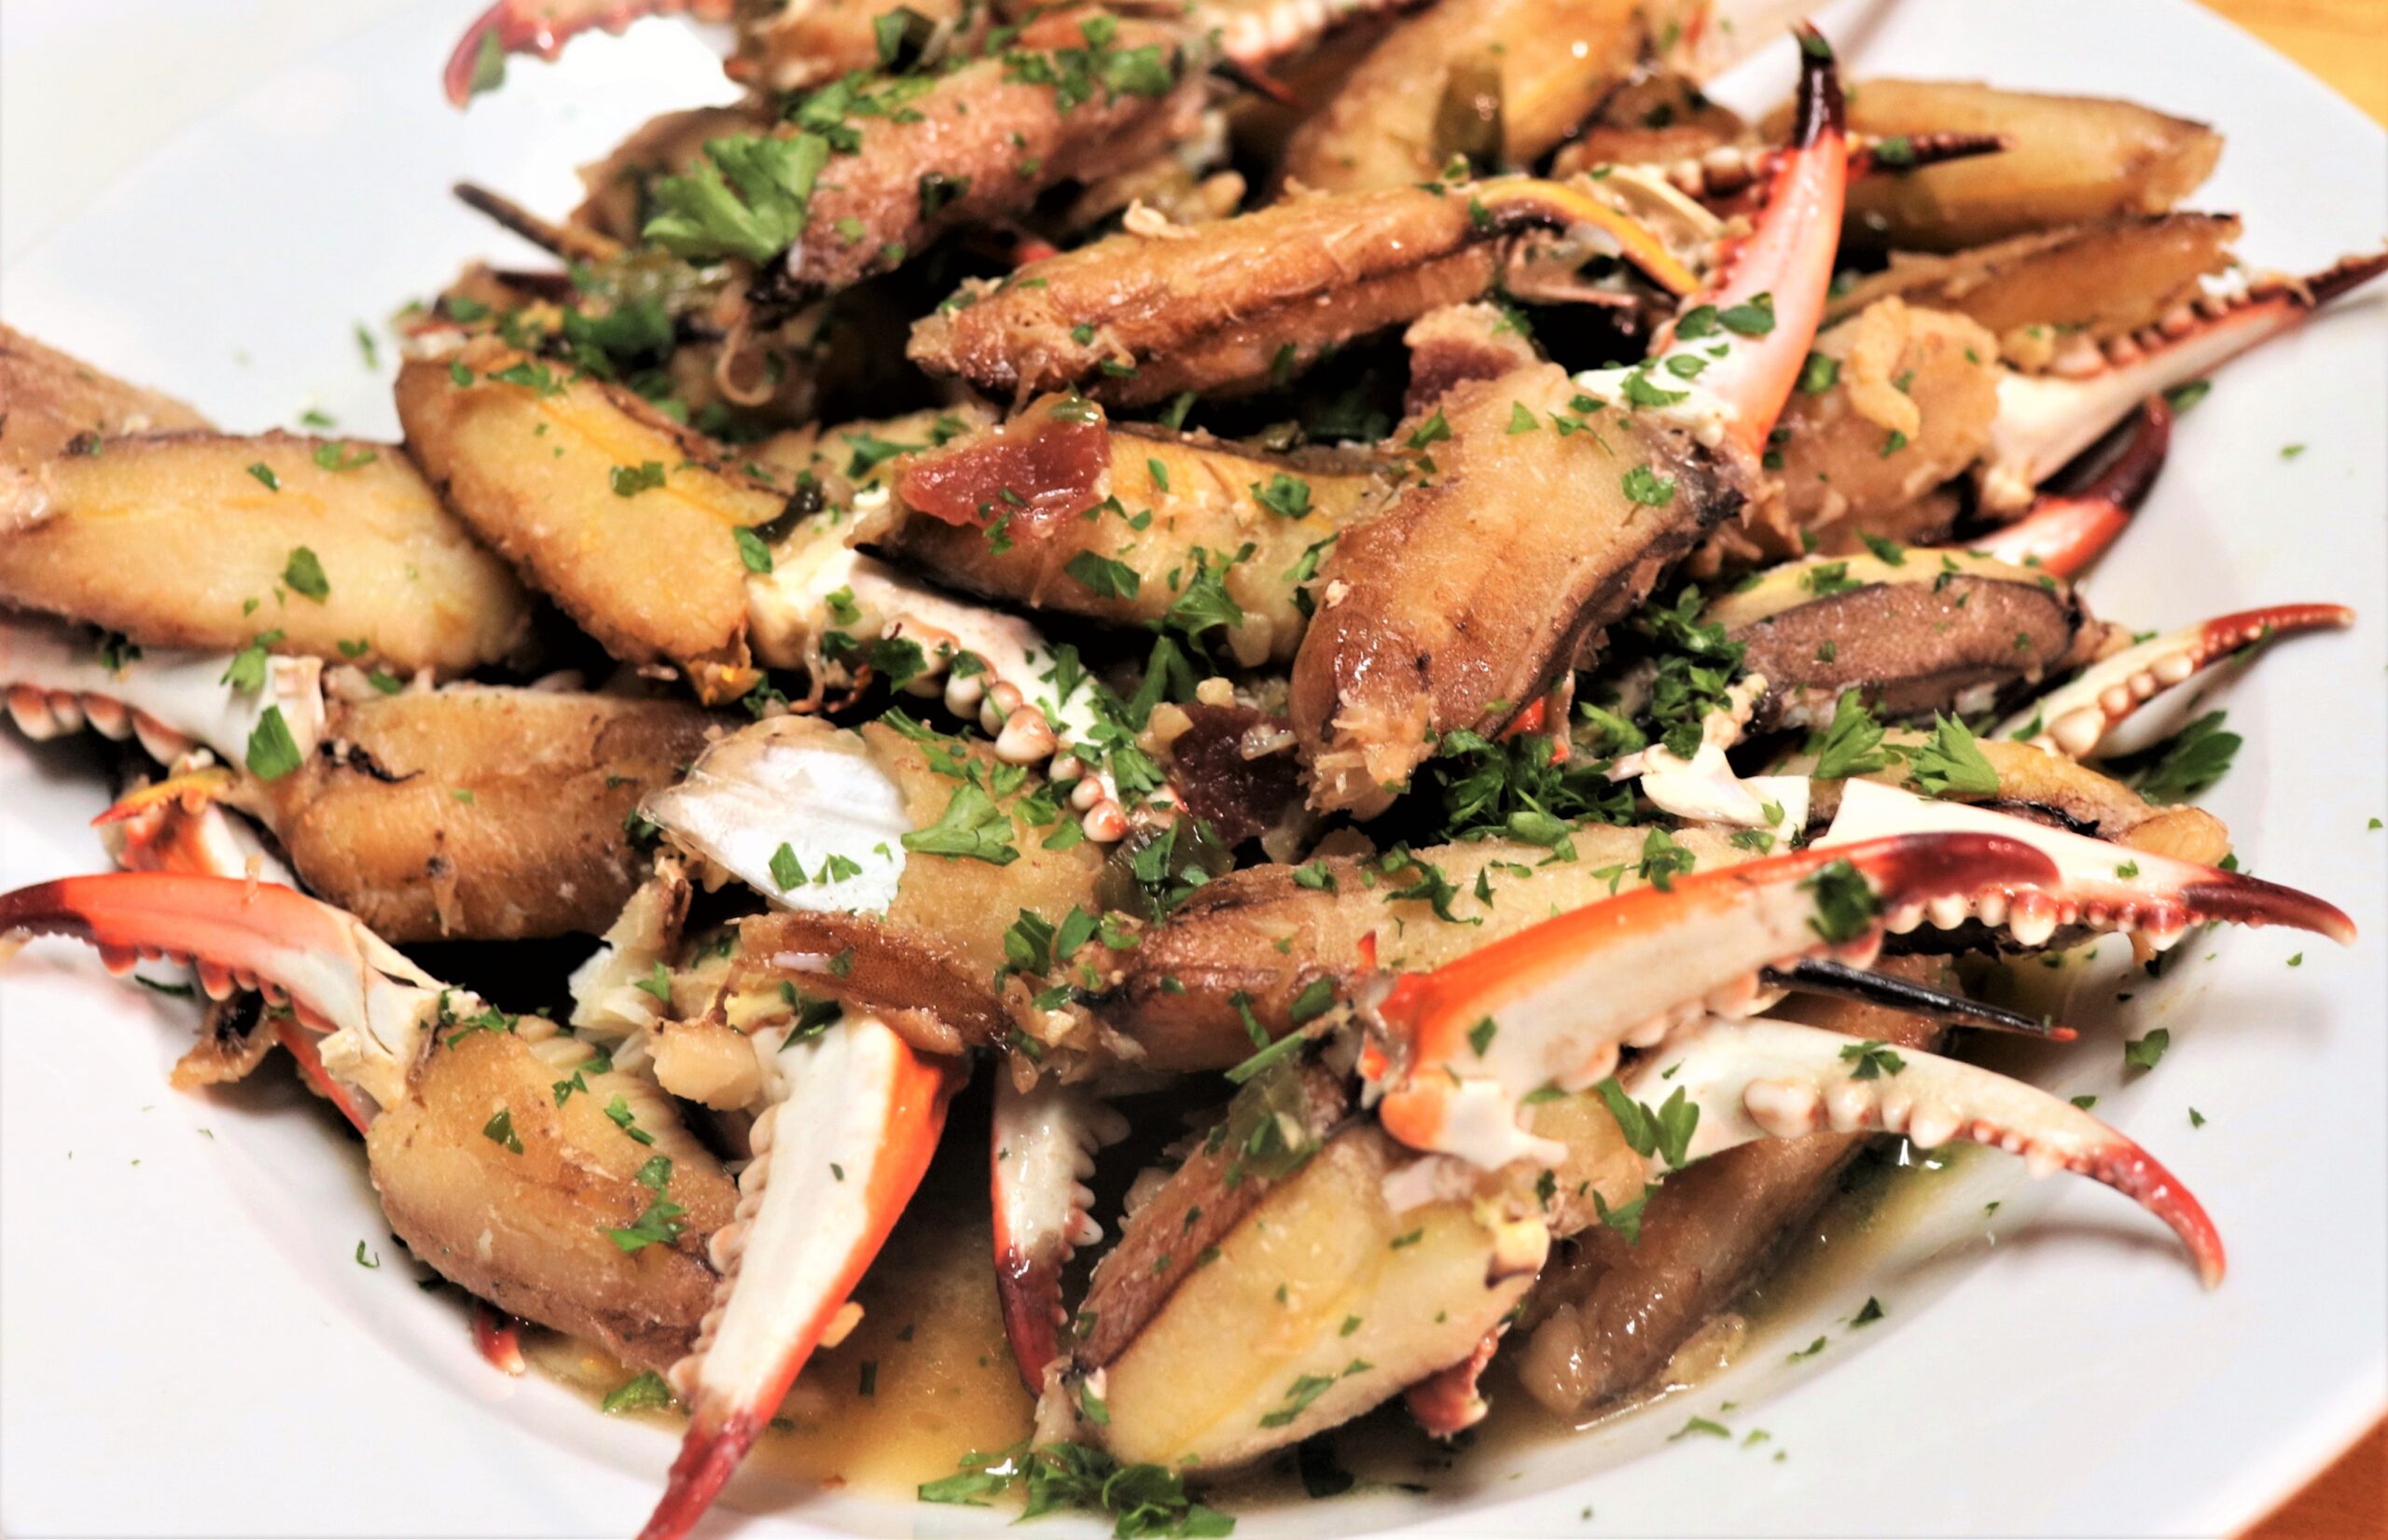 Hot Buttered Crab Claws–The New Normal